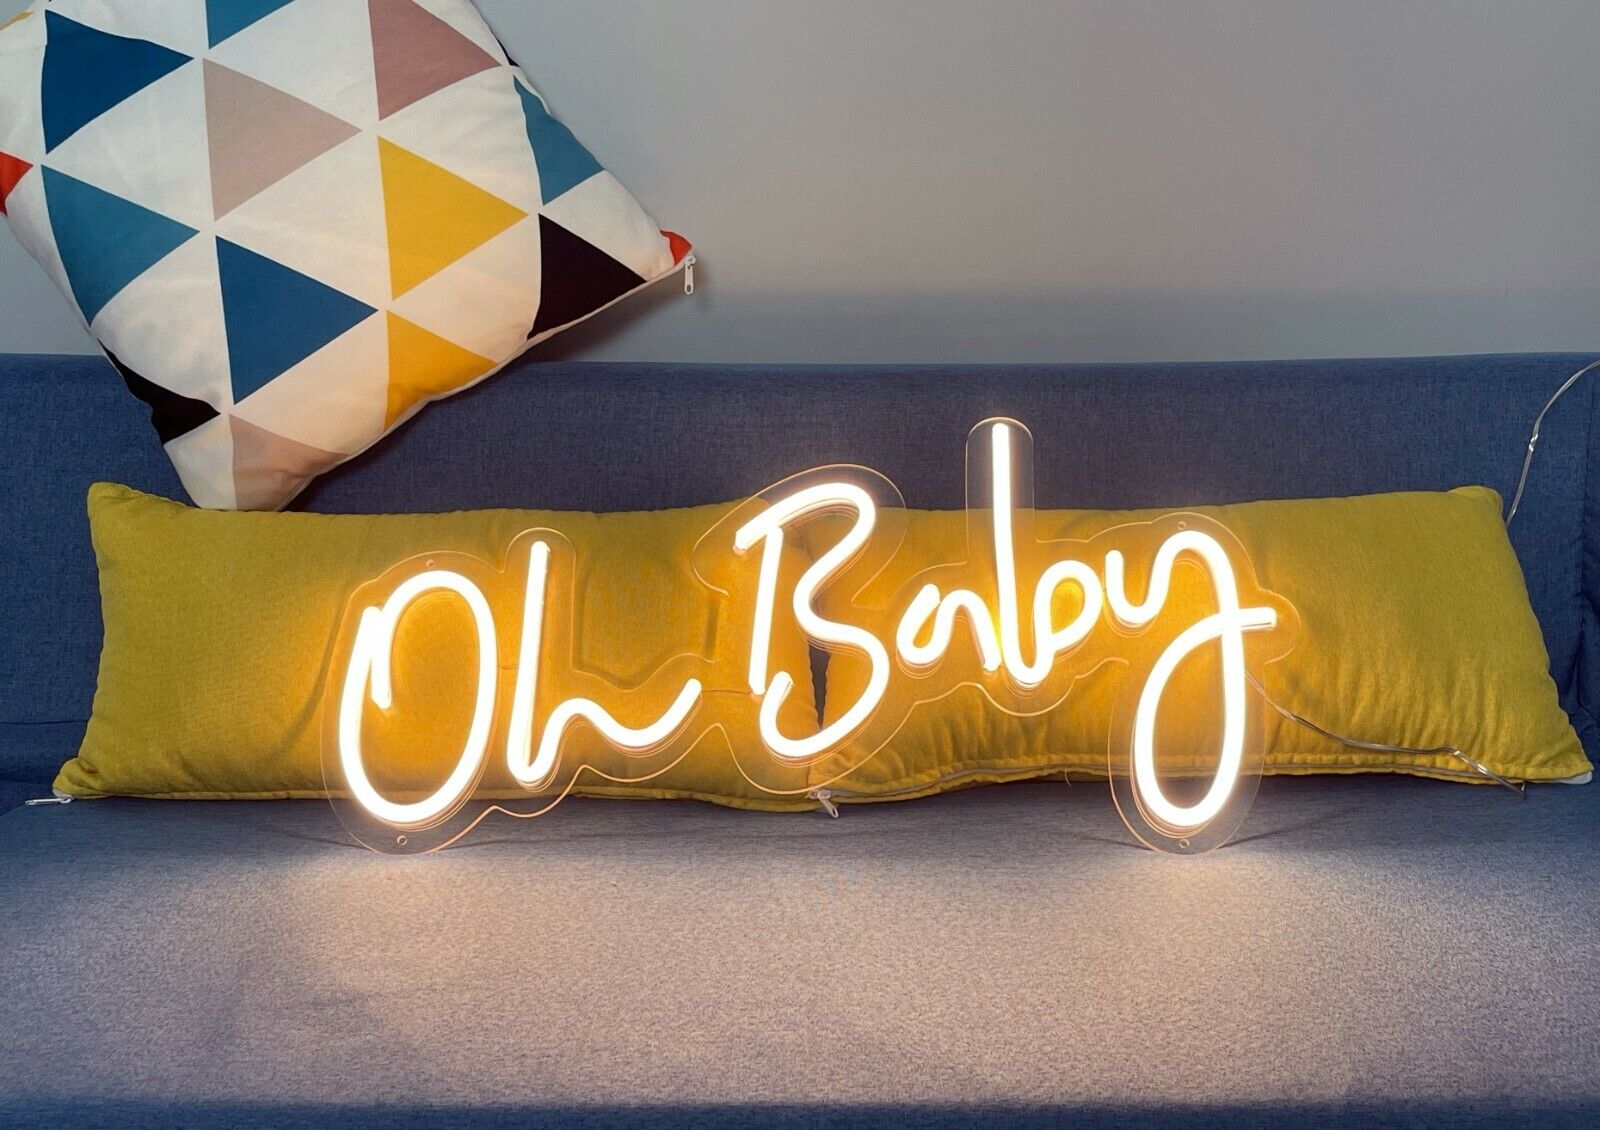 Oh Baby LED Neon light Sign, for Party, Home, Cafes room wall decorations